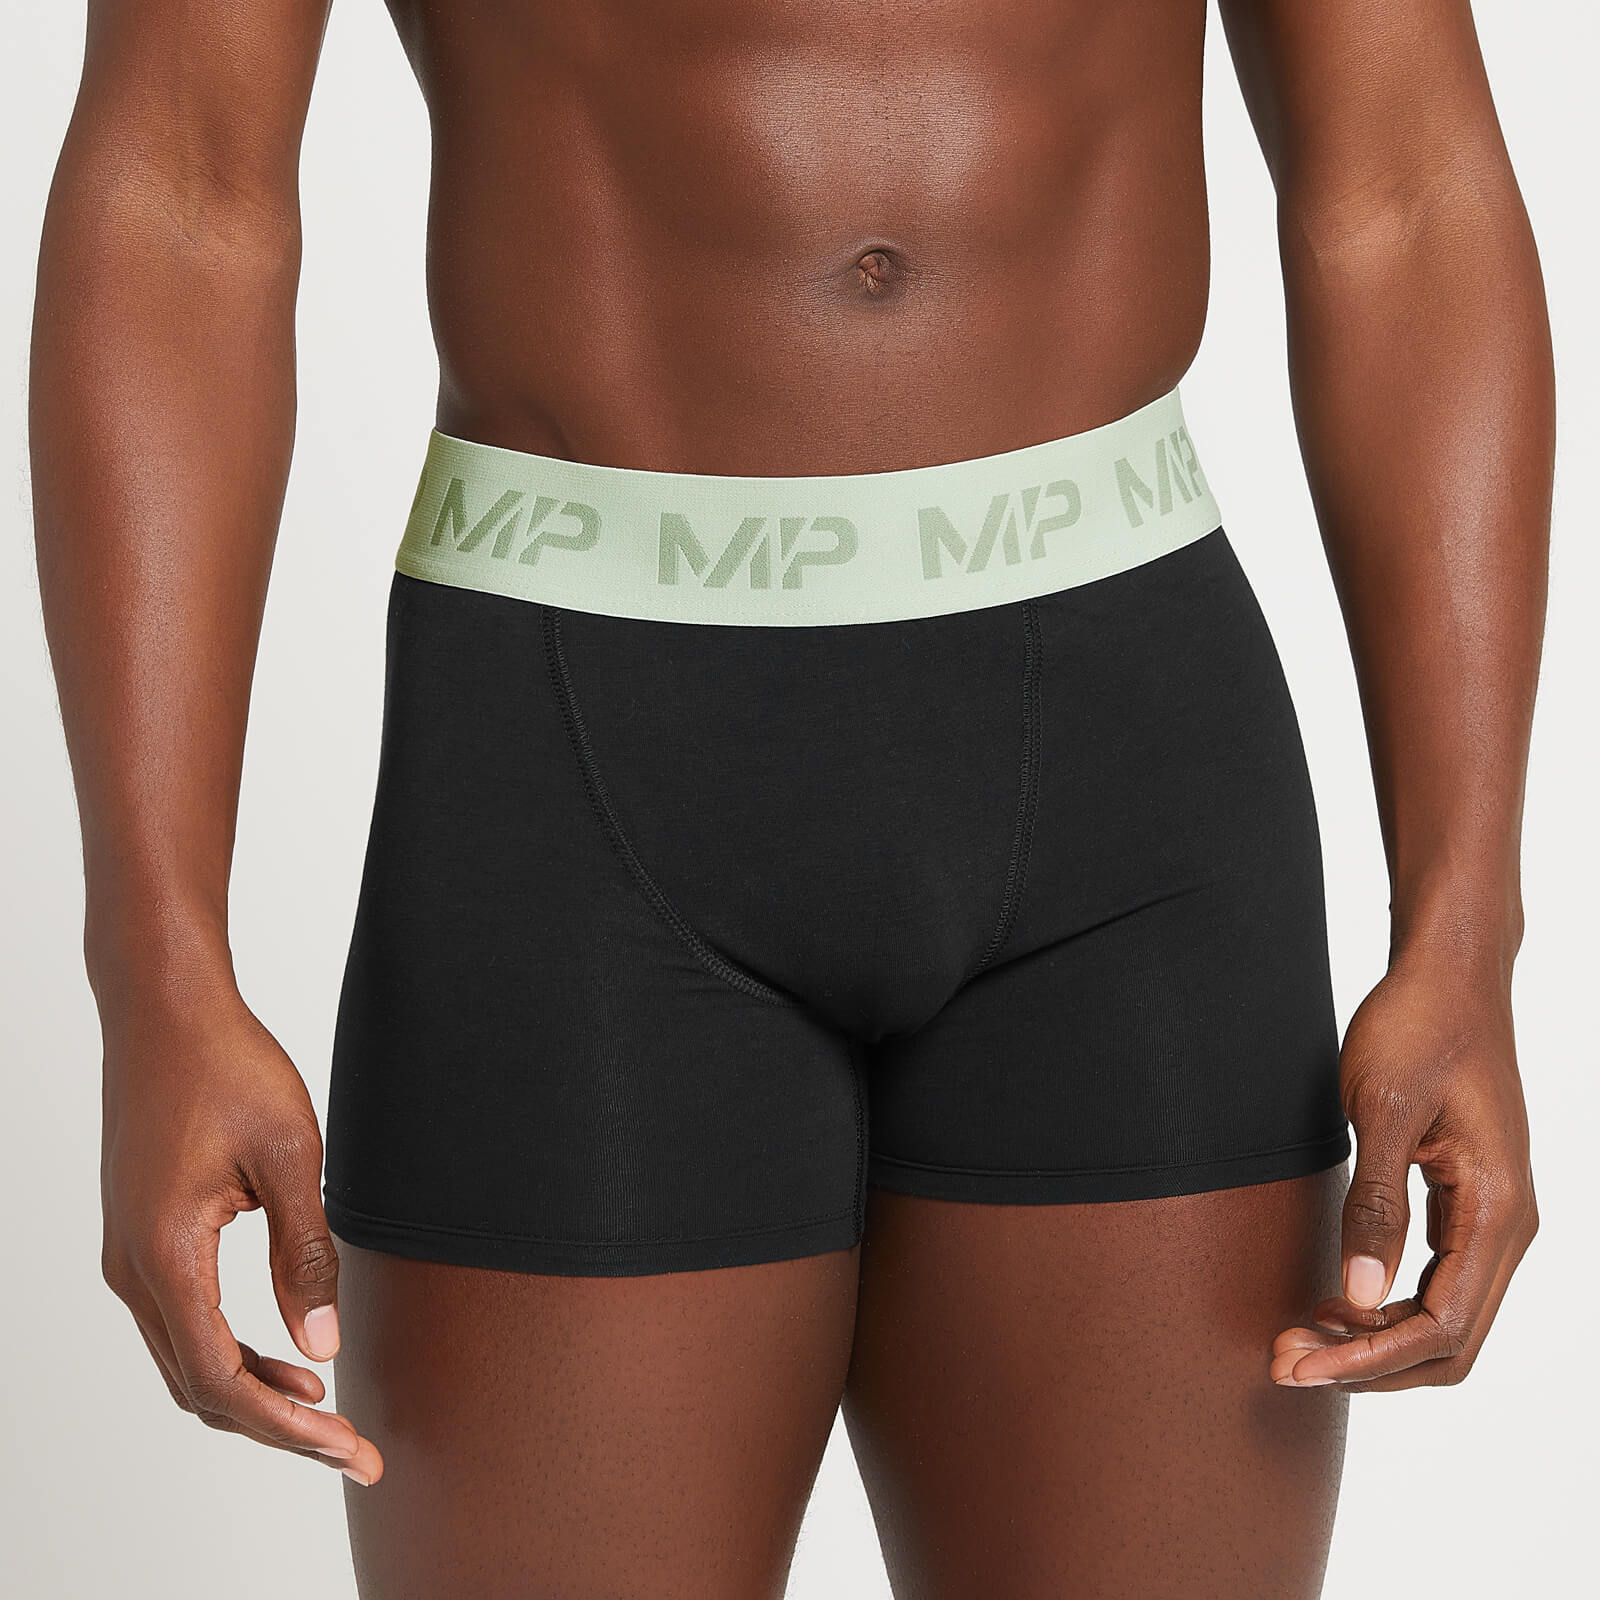 MP Men's Coloured Waistband Boxers (3 Pack) - Black/Frost Green/Steel Blue/Ice Blue - XXL